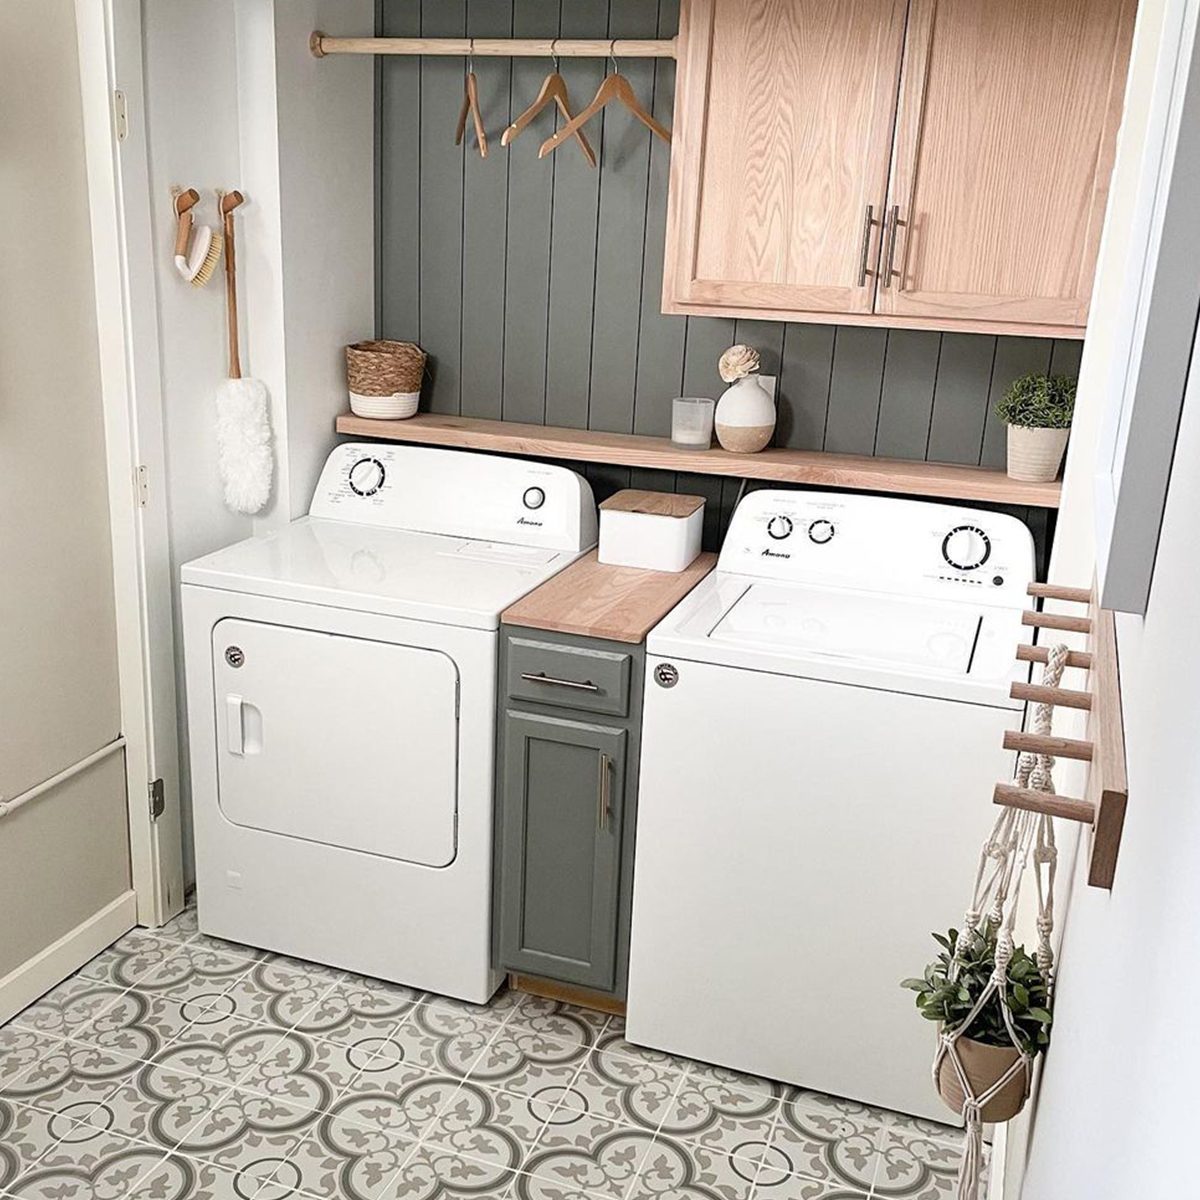 Cute And Cozy Laundry Room Design Courtesy Onteallane Roomforrevival